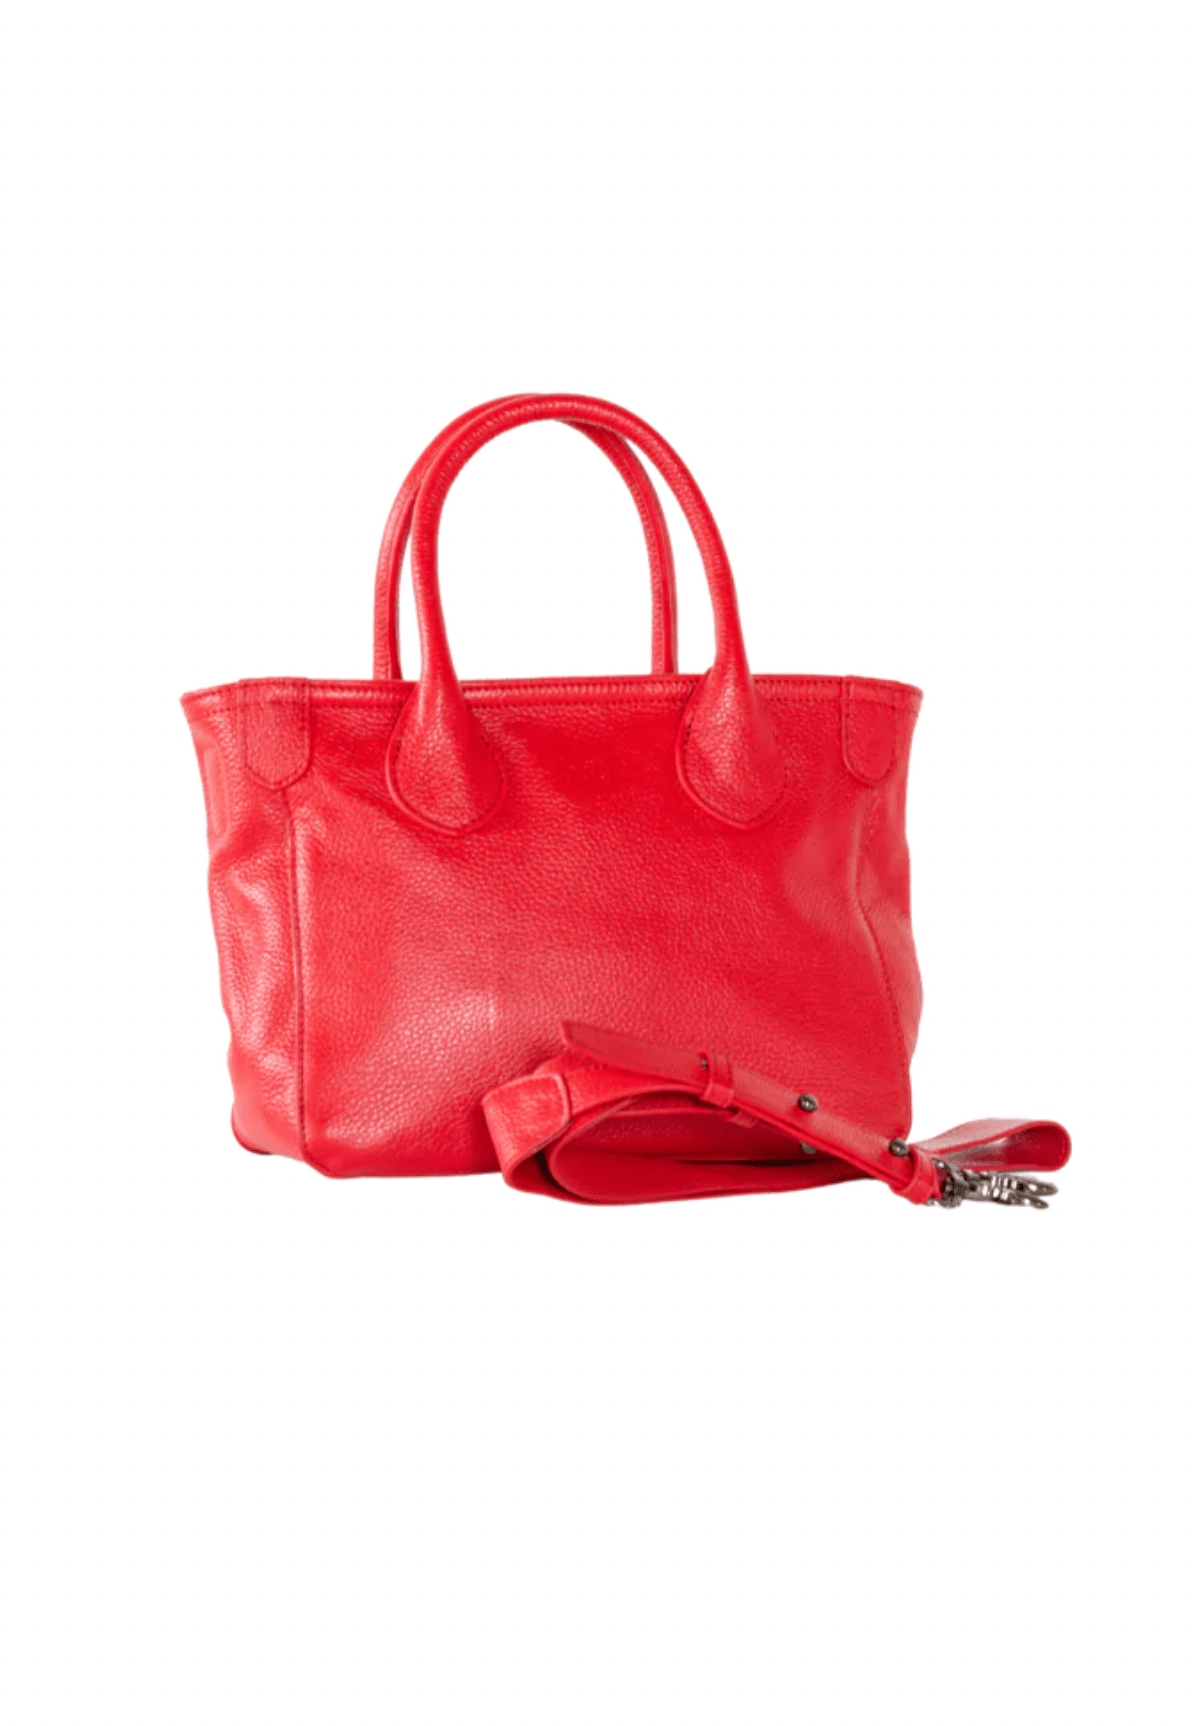 madison red beckini by beck bags - a great small tote crossbody